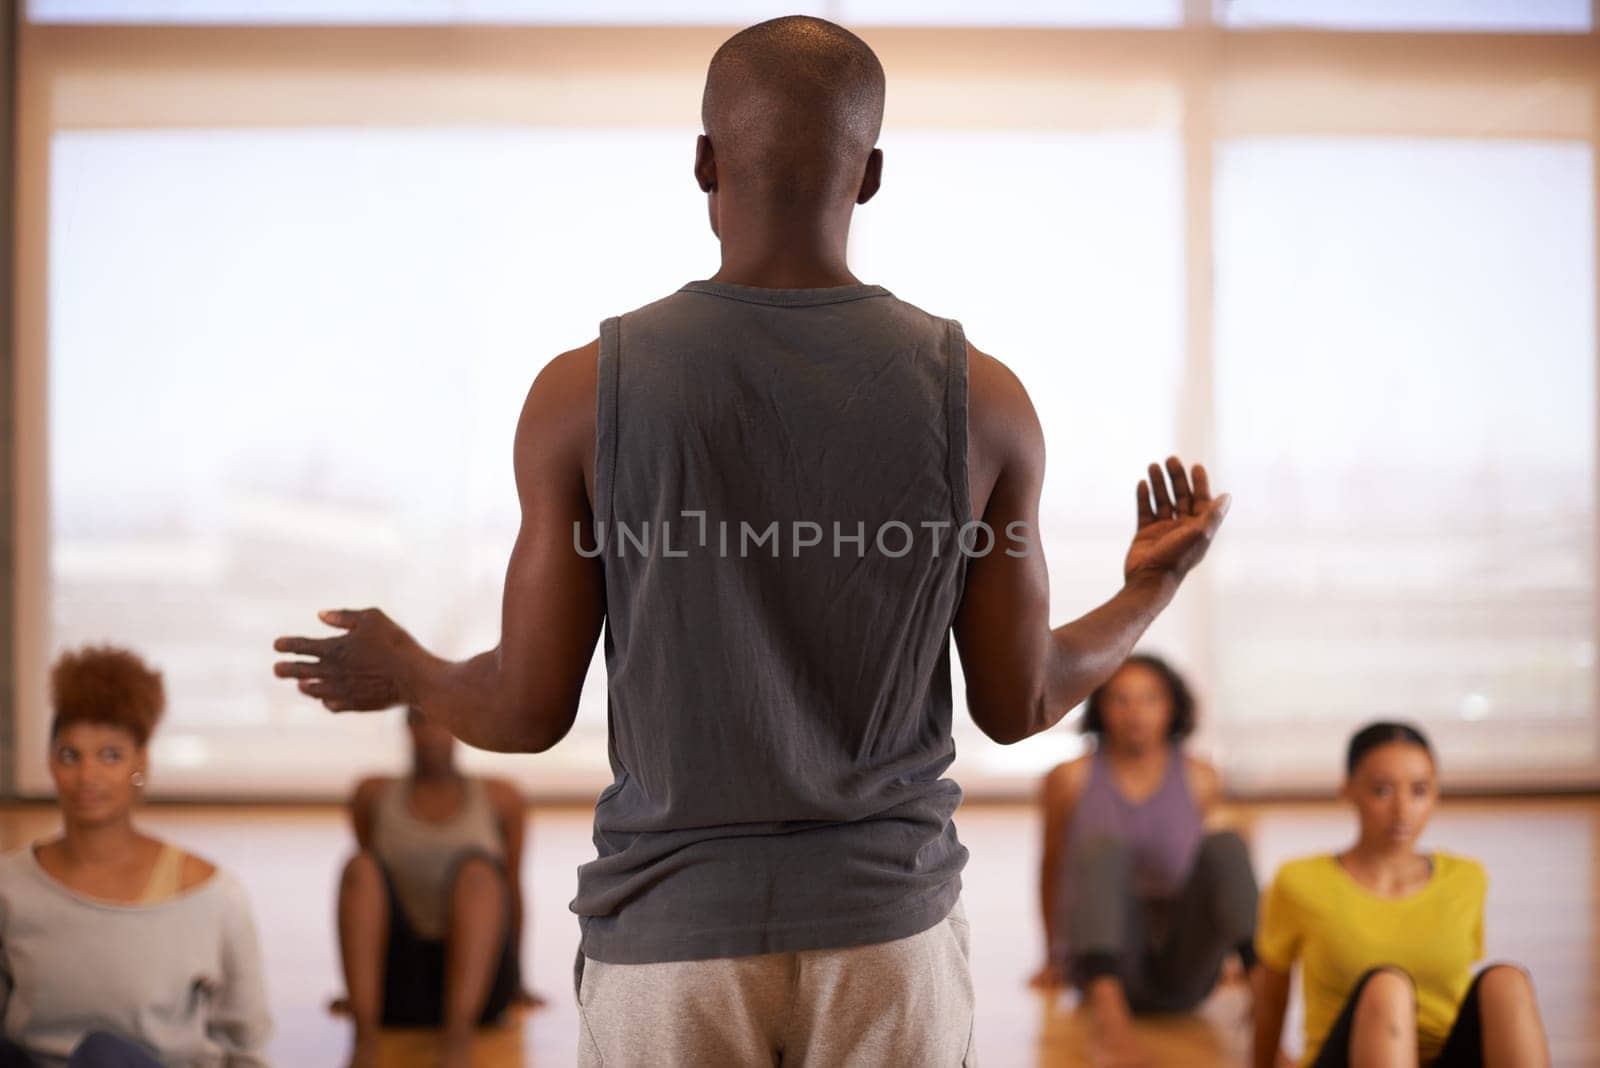 People, dancer and instructor with class of students in fitness, workout or pilates at the studio. Rear view of personal trainer talking to group in body warm up or stretching for health and wellness.